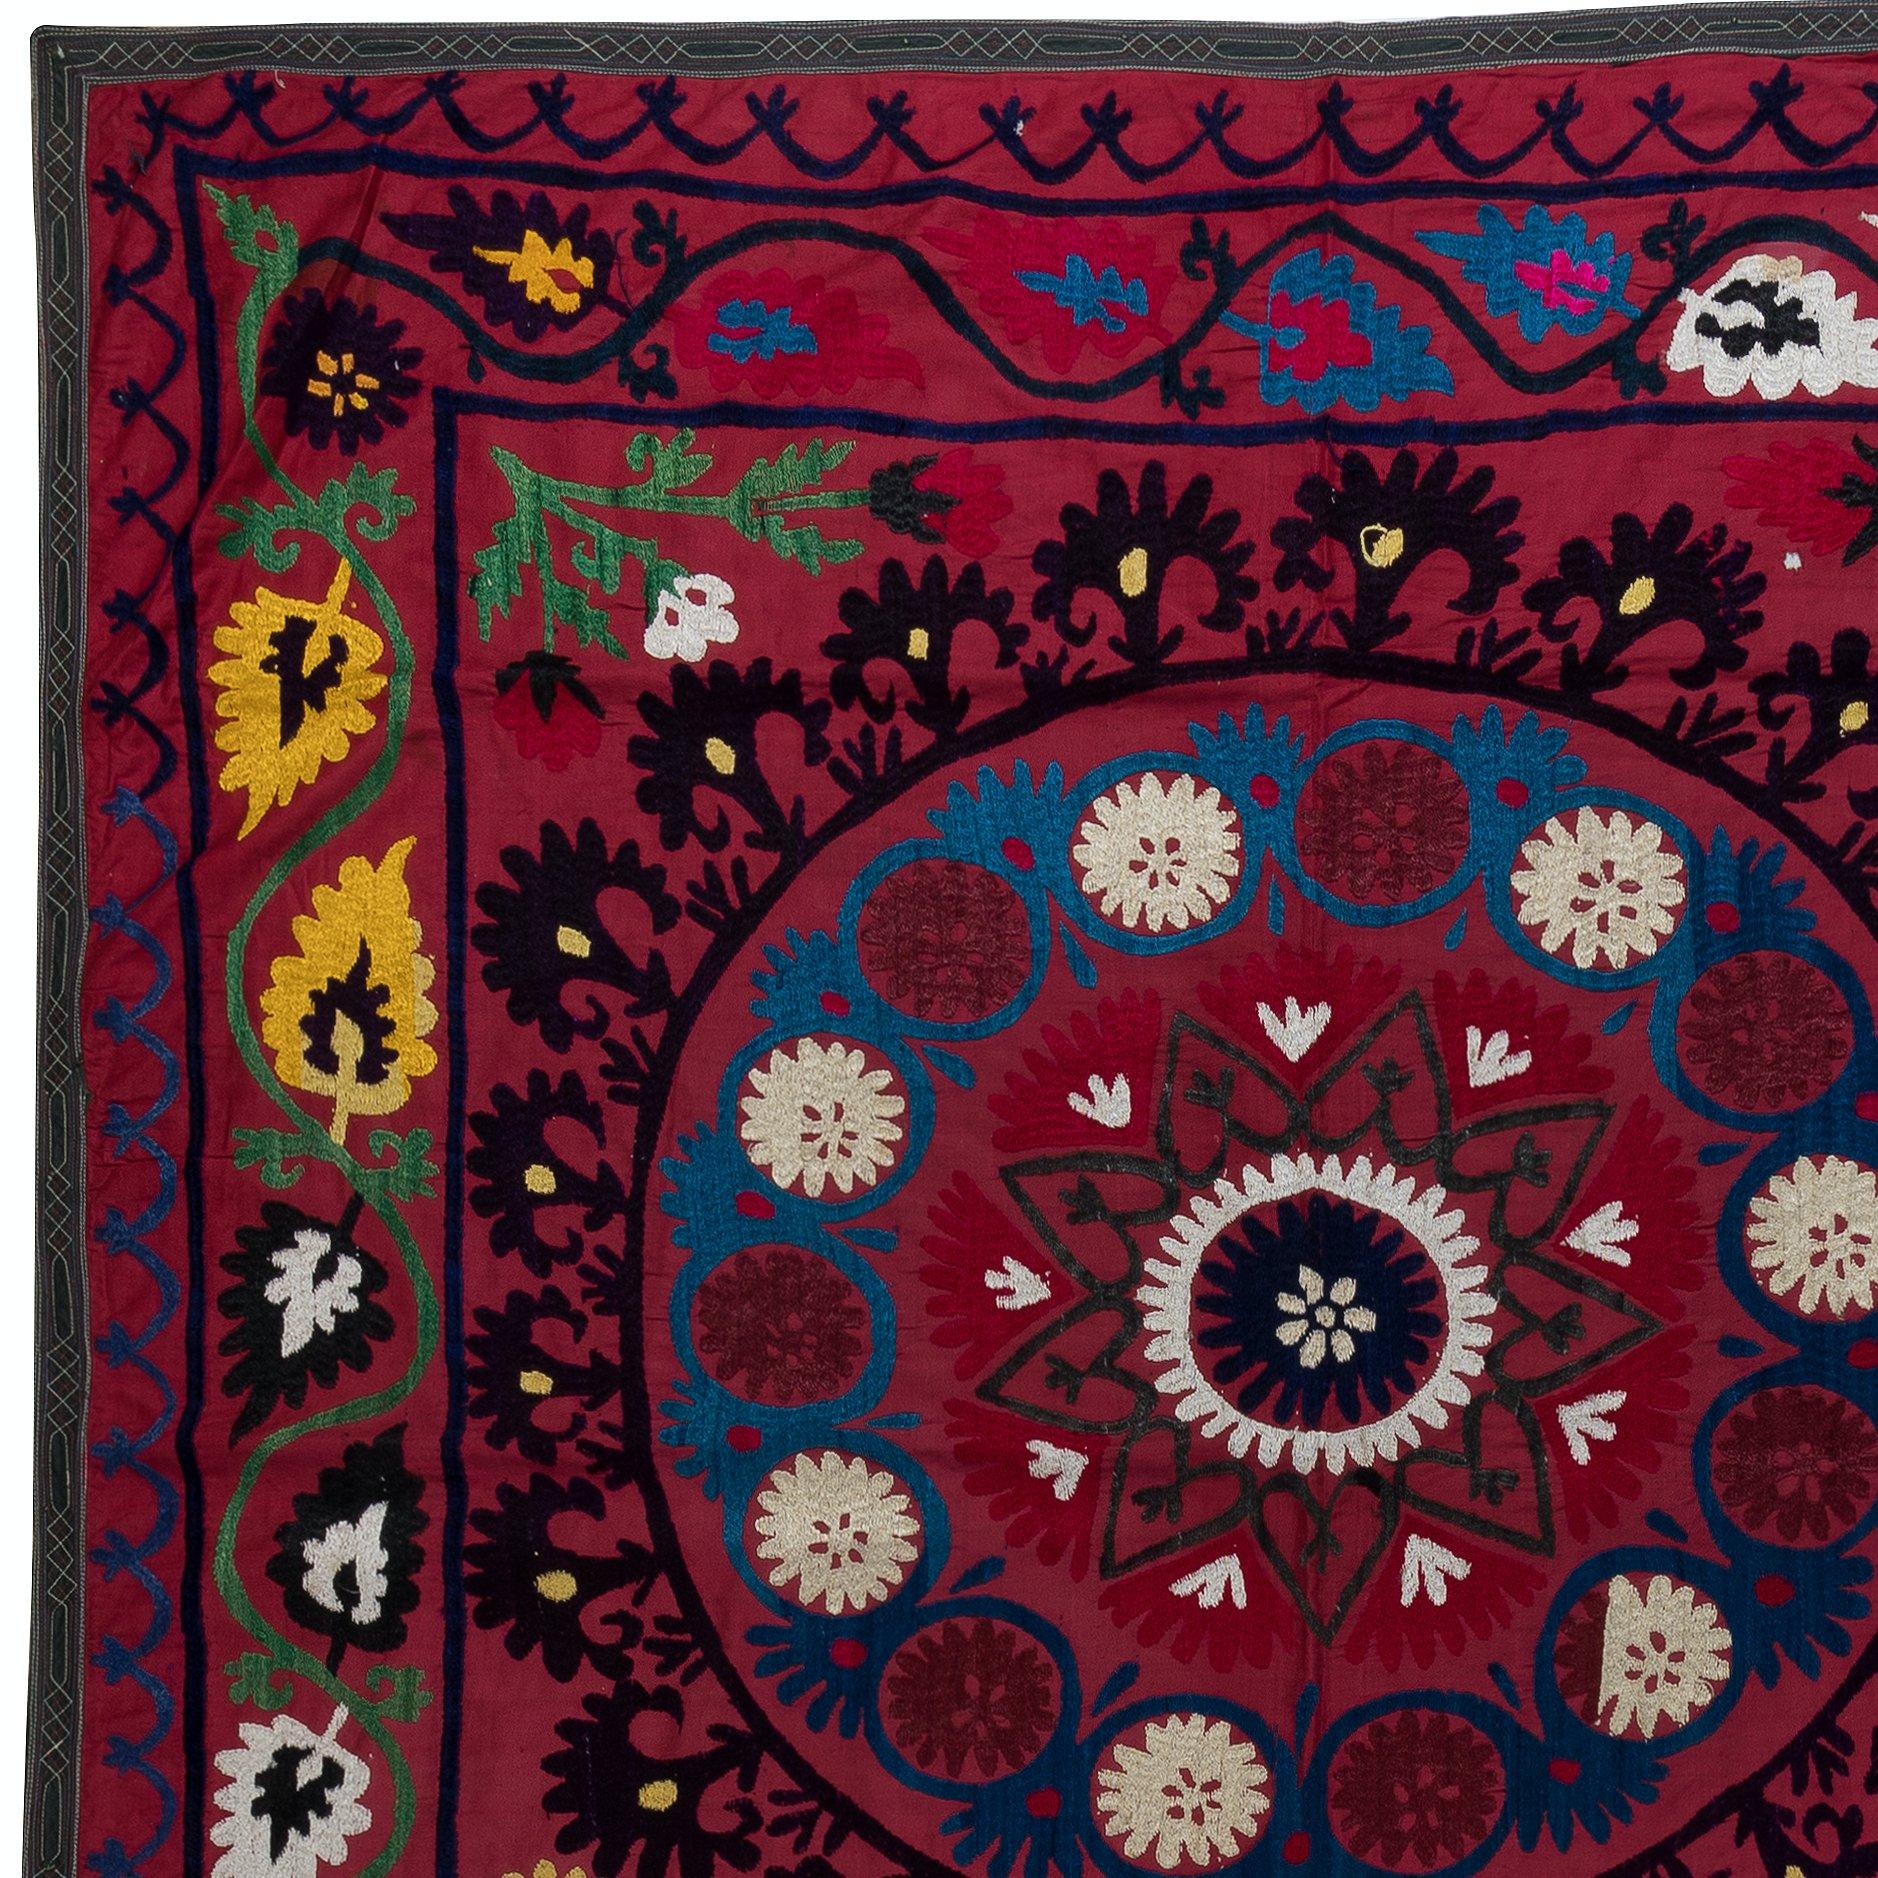 Step into a world of vibrant colors and intricate craftsmanship with our Uzbek Suzani Hand Embroidered Silk Wall Hanging or Bed Cover. This stunning piece is perfect for adding a touch of elegance to your home decor.

Made from a blend of silk and